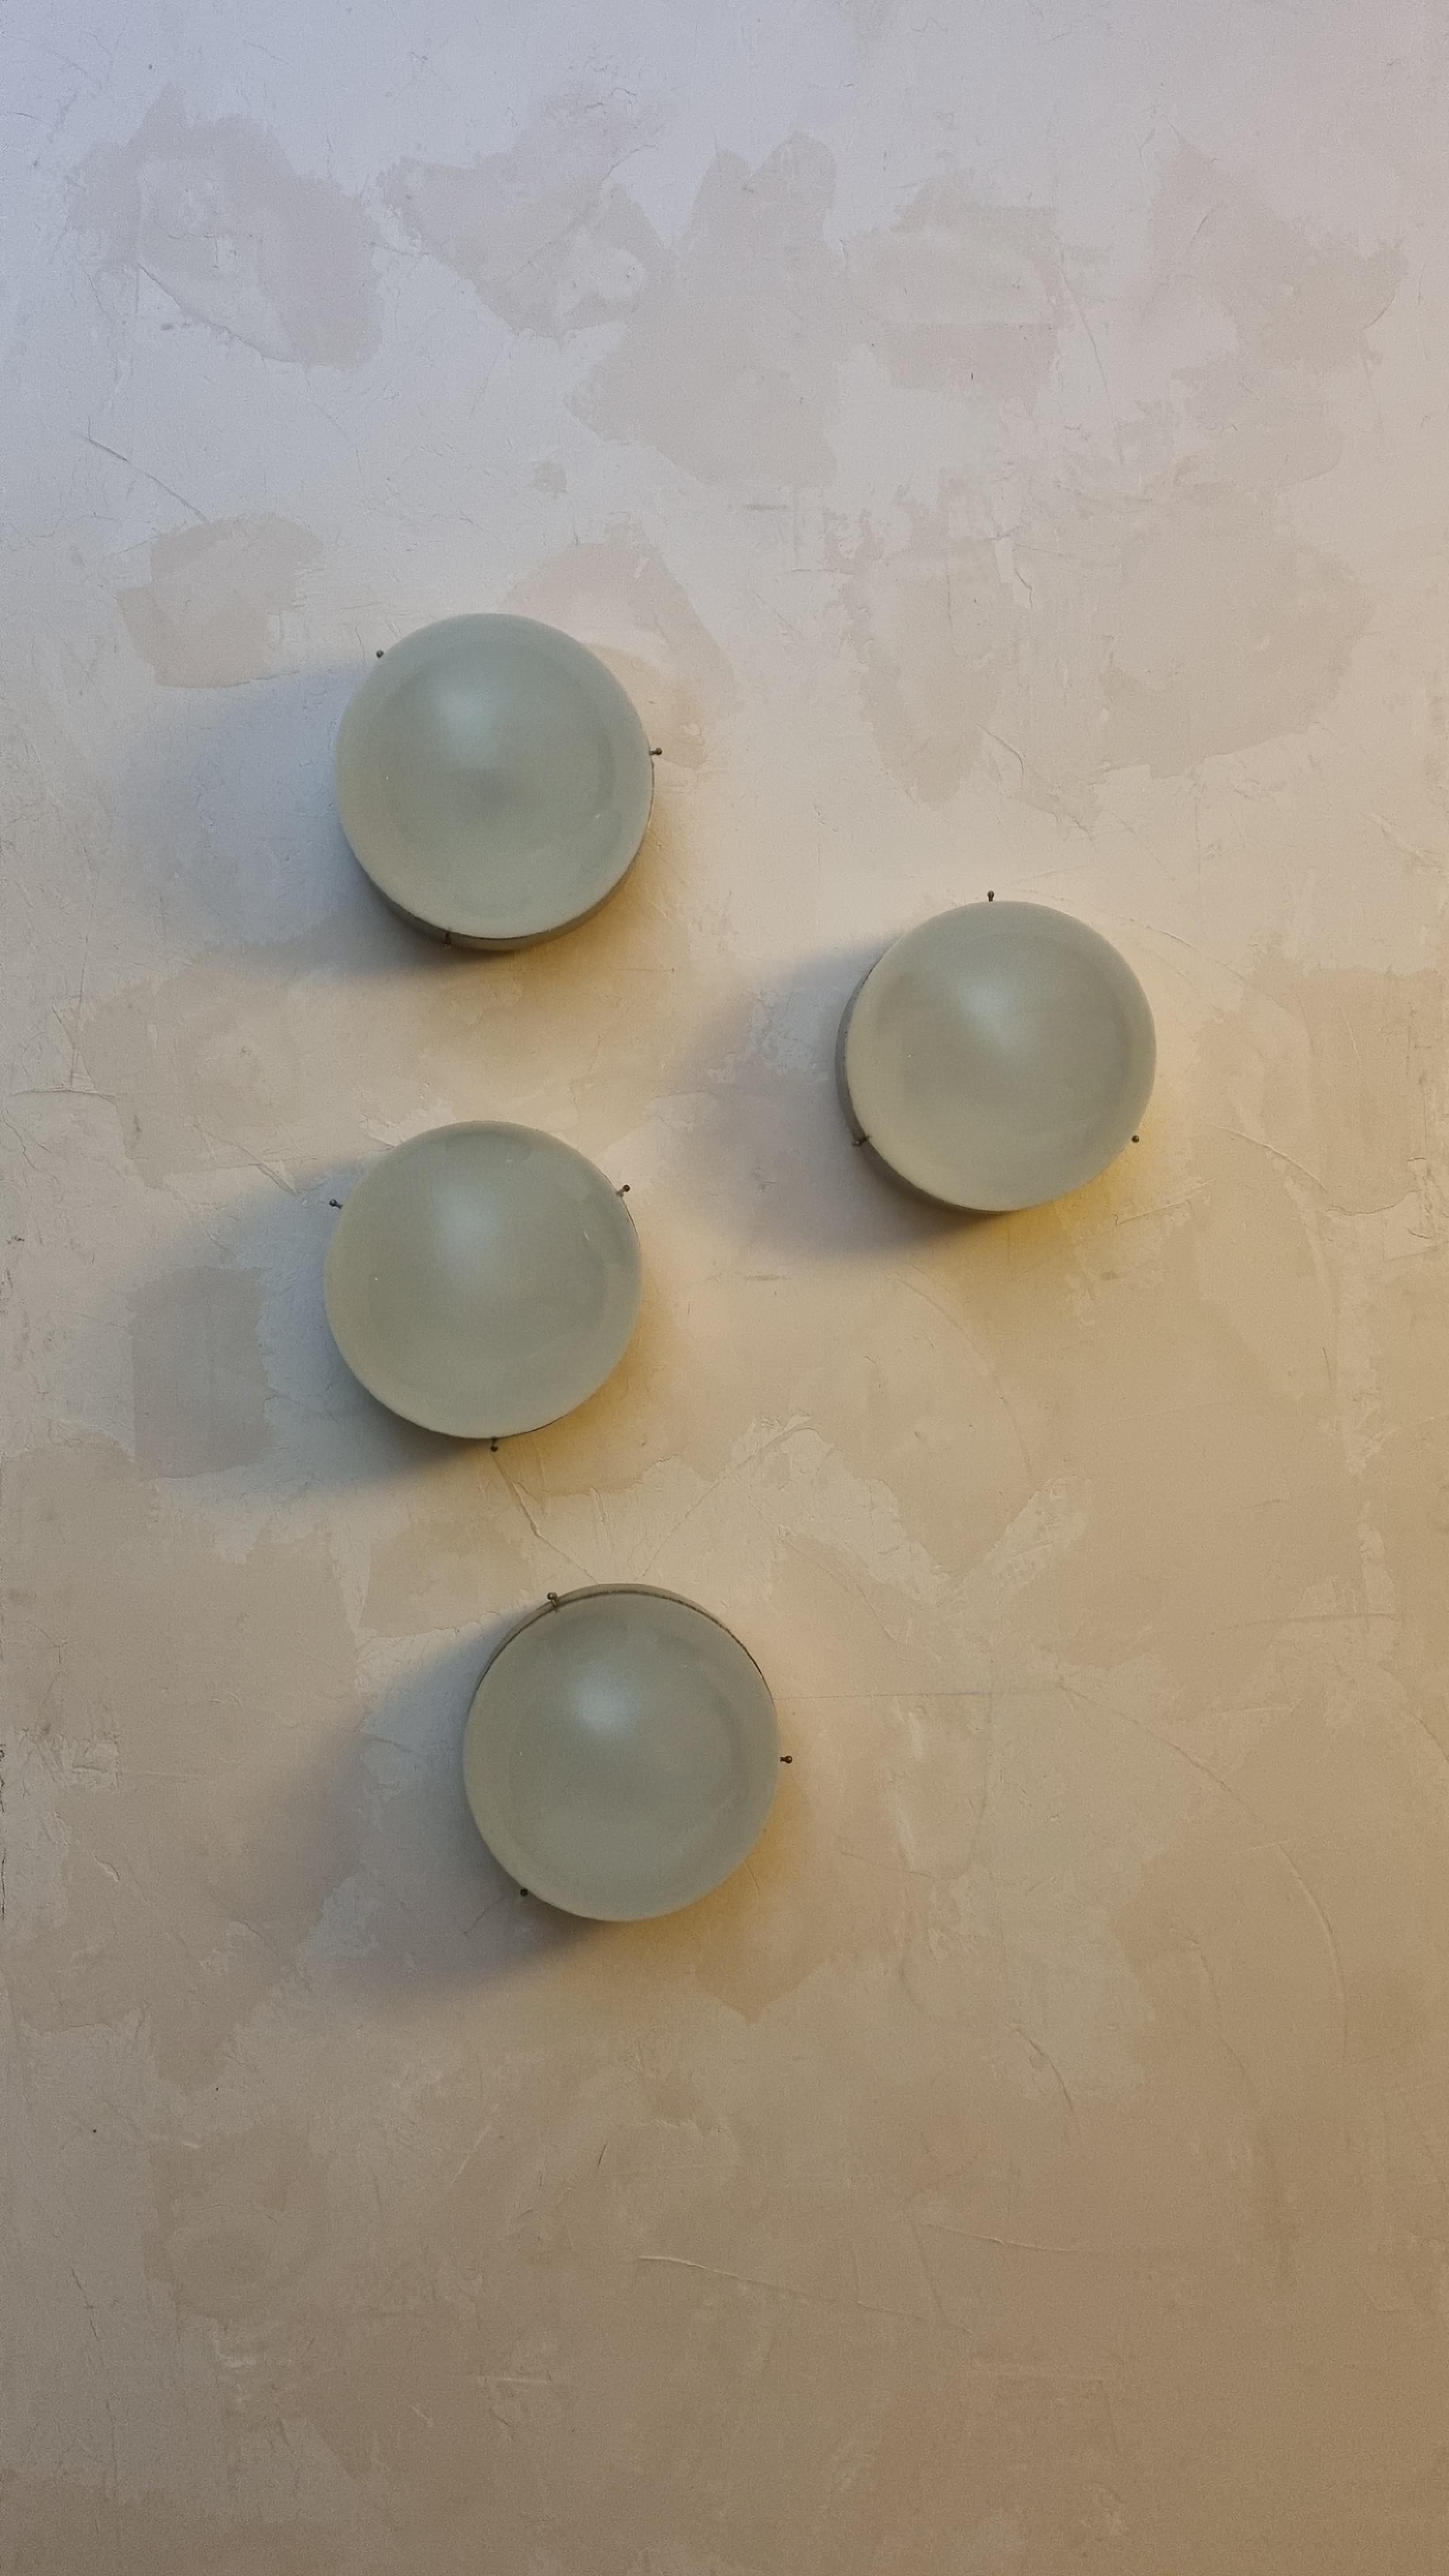 Set of 4 Clio wall sconces designed by Sergio Mazza for Artemide in the 1963, frosted glass lampshade , structure in nickel-plated brass, each lamp  superimposed 1 light points that emit a warm and soft light. mounts E 27 bulbs.
Excellent